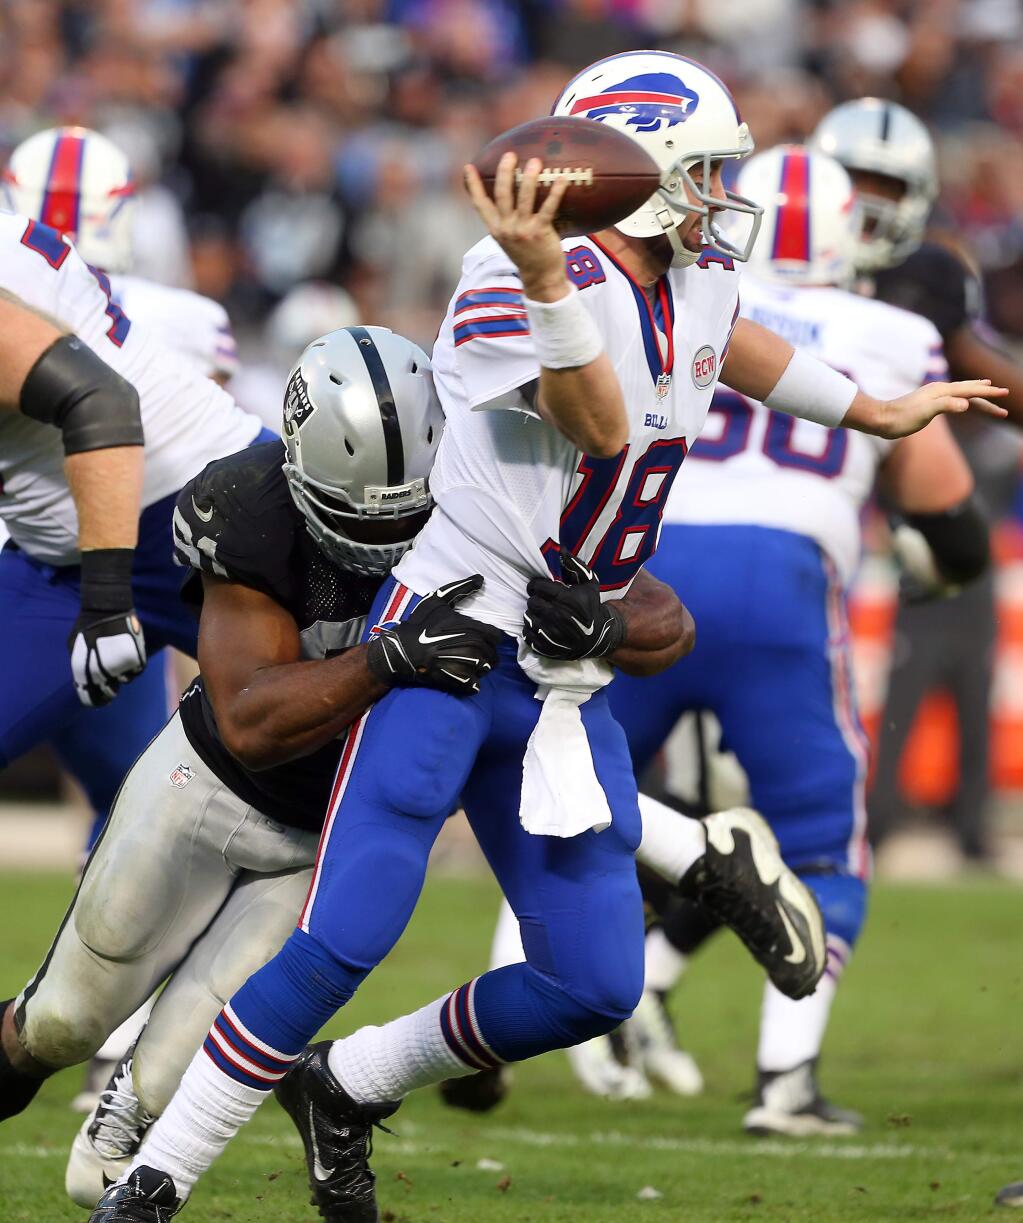 Oakland Raiders defensive end Justin Tuck sacks Buffalo Bills quarterback Kyle Orton in the fourth quarter of their game in Oakland on Sunday, December 21, 2014. The Raiders defeated the Bills 26-24.(Christopher Chung/ The Press Democrat)